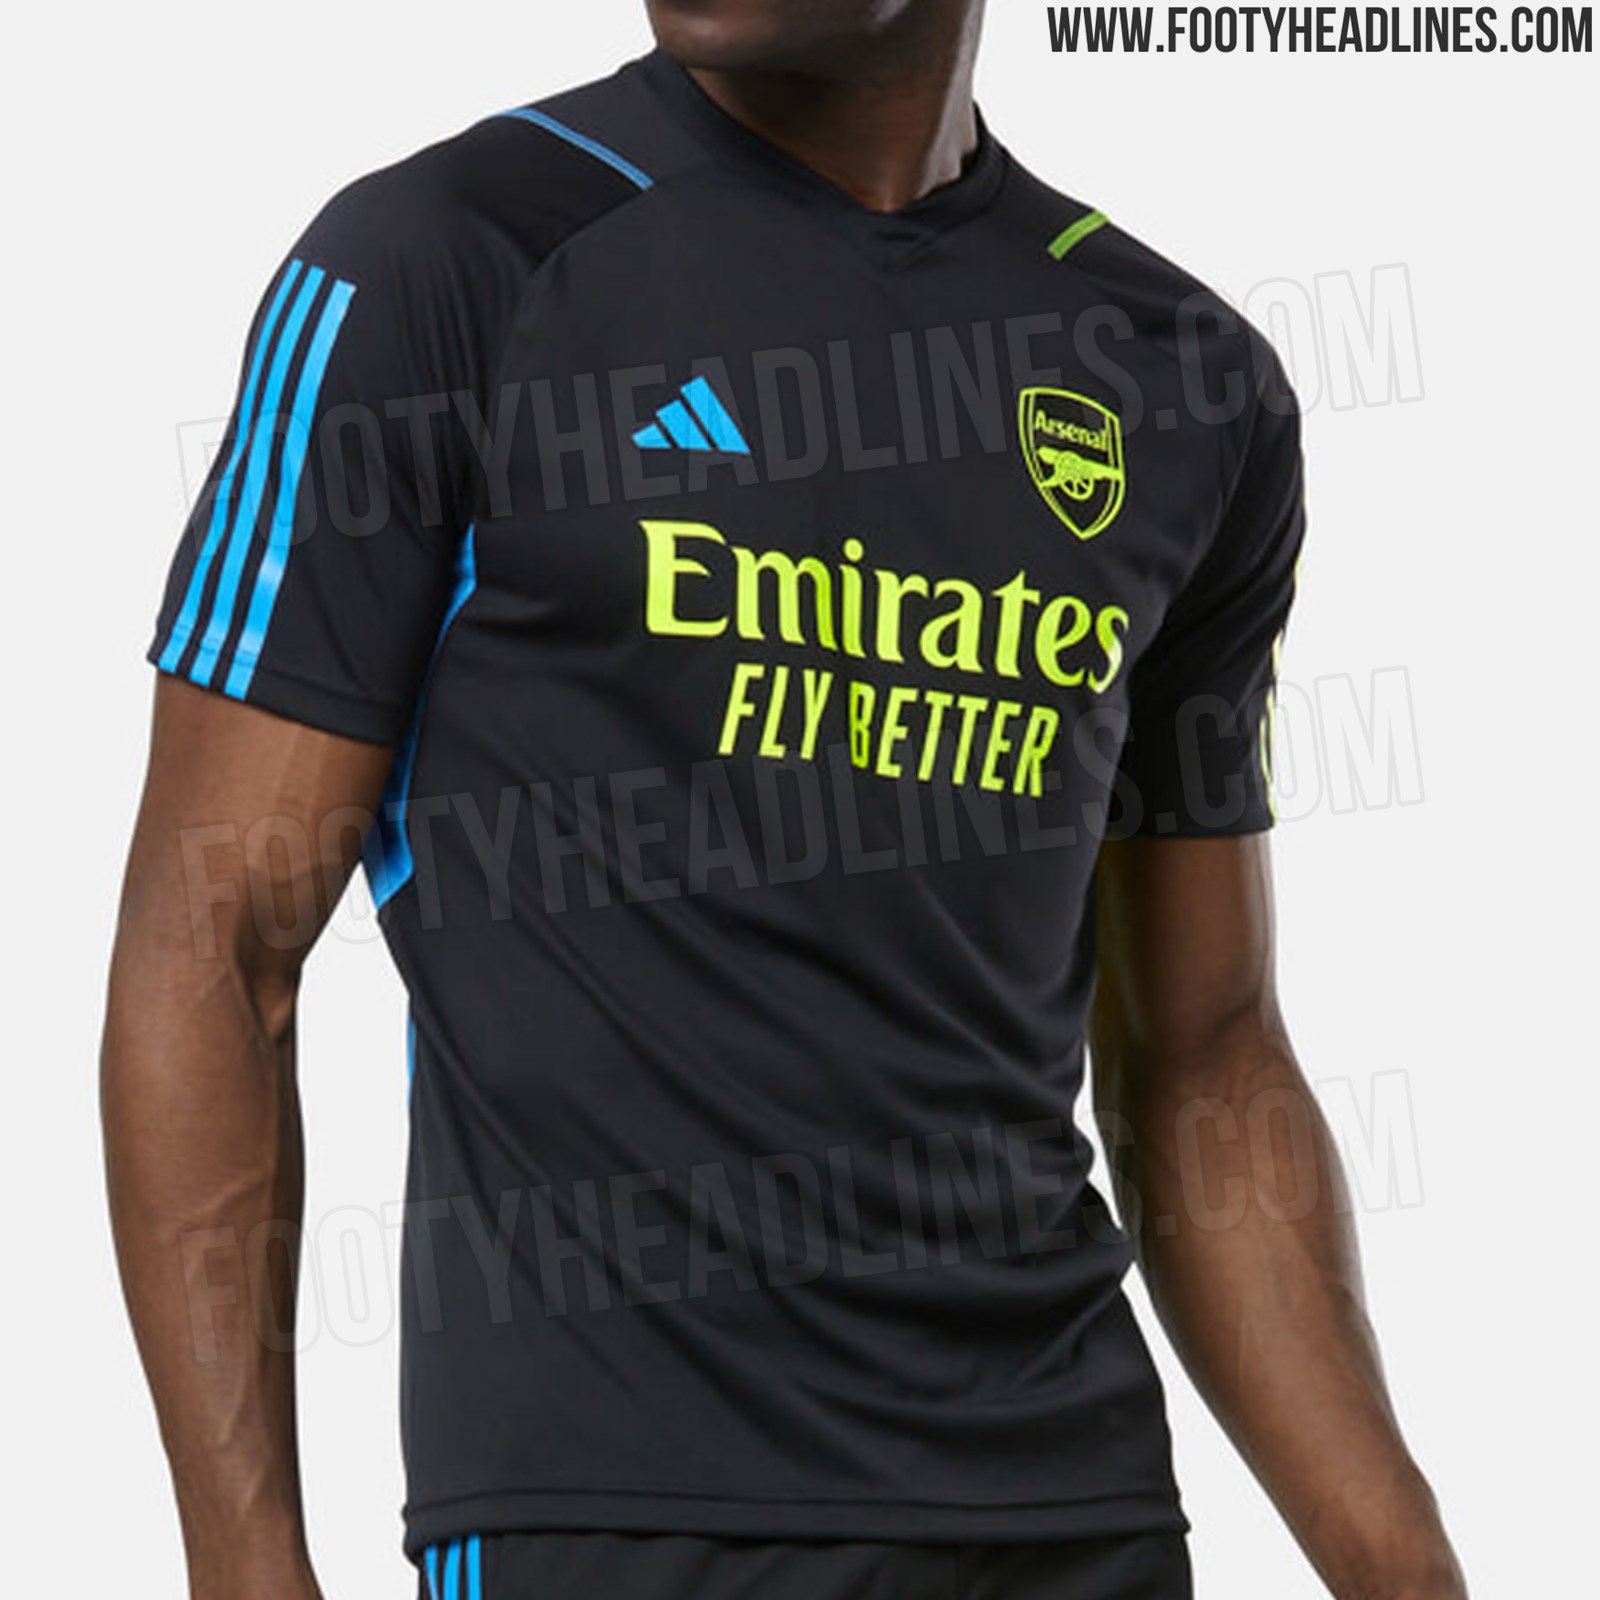 LEAKED: Adidas to Release Half and Half Training Style for Arsenal